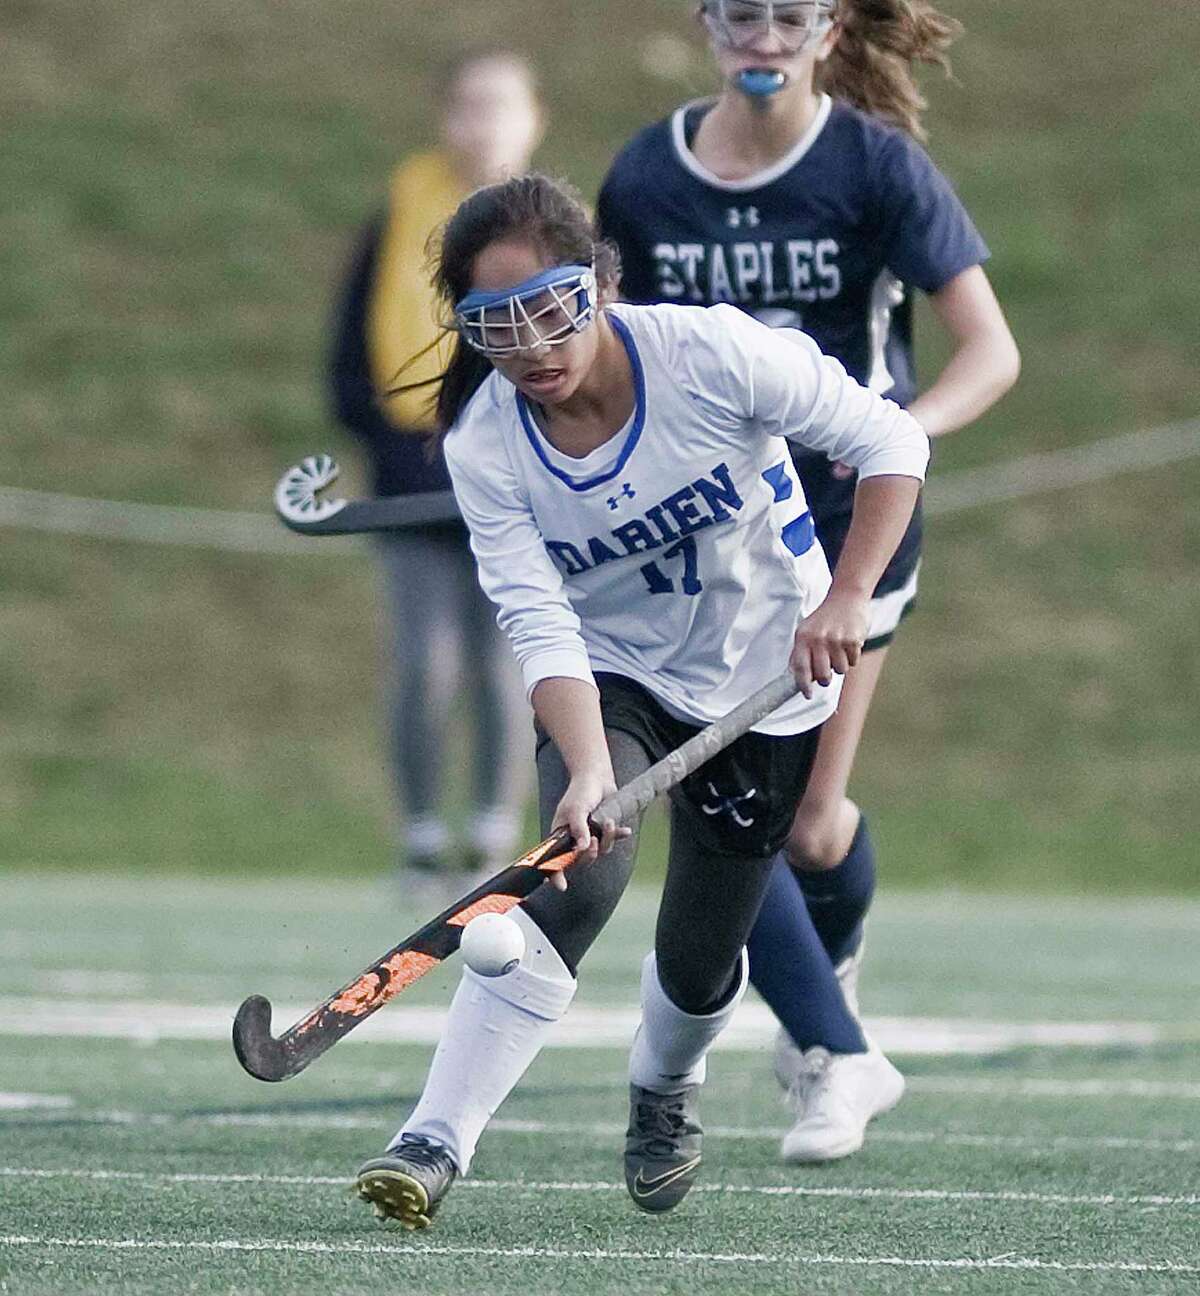 Darien High School's Tala Garcia gains control of the ball up the field in the Class L state field hockey championship game against Staples High School, played at Wethersfield High School. Saturday, Nov. 23, 2019